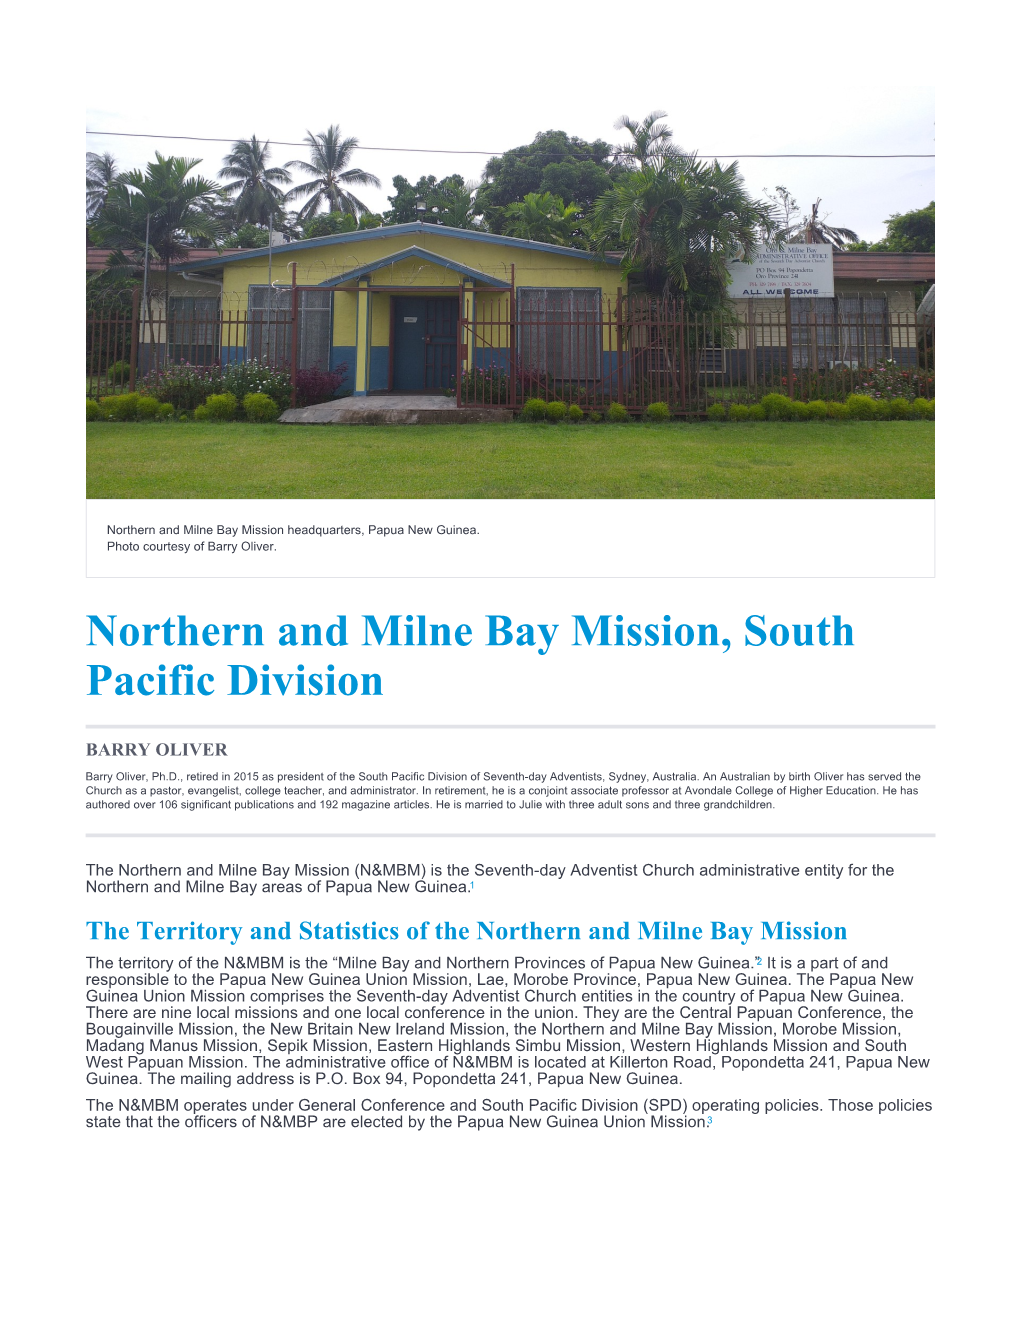 Northern and Milne Bay Mission, South Pacific Division